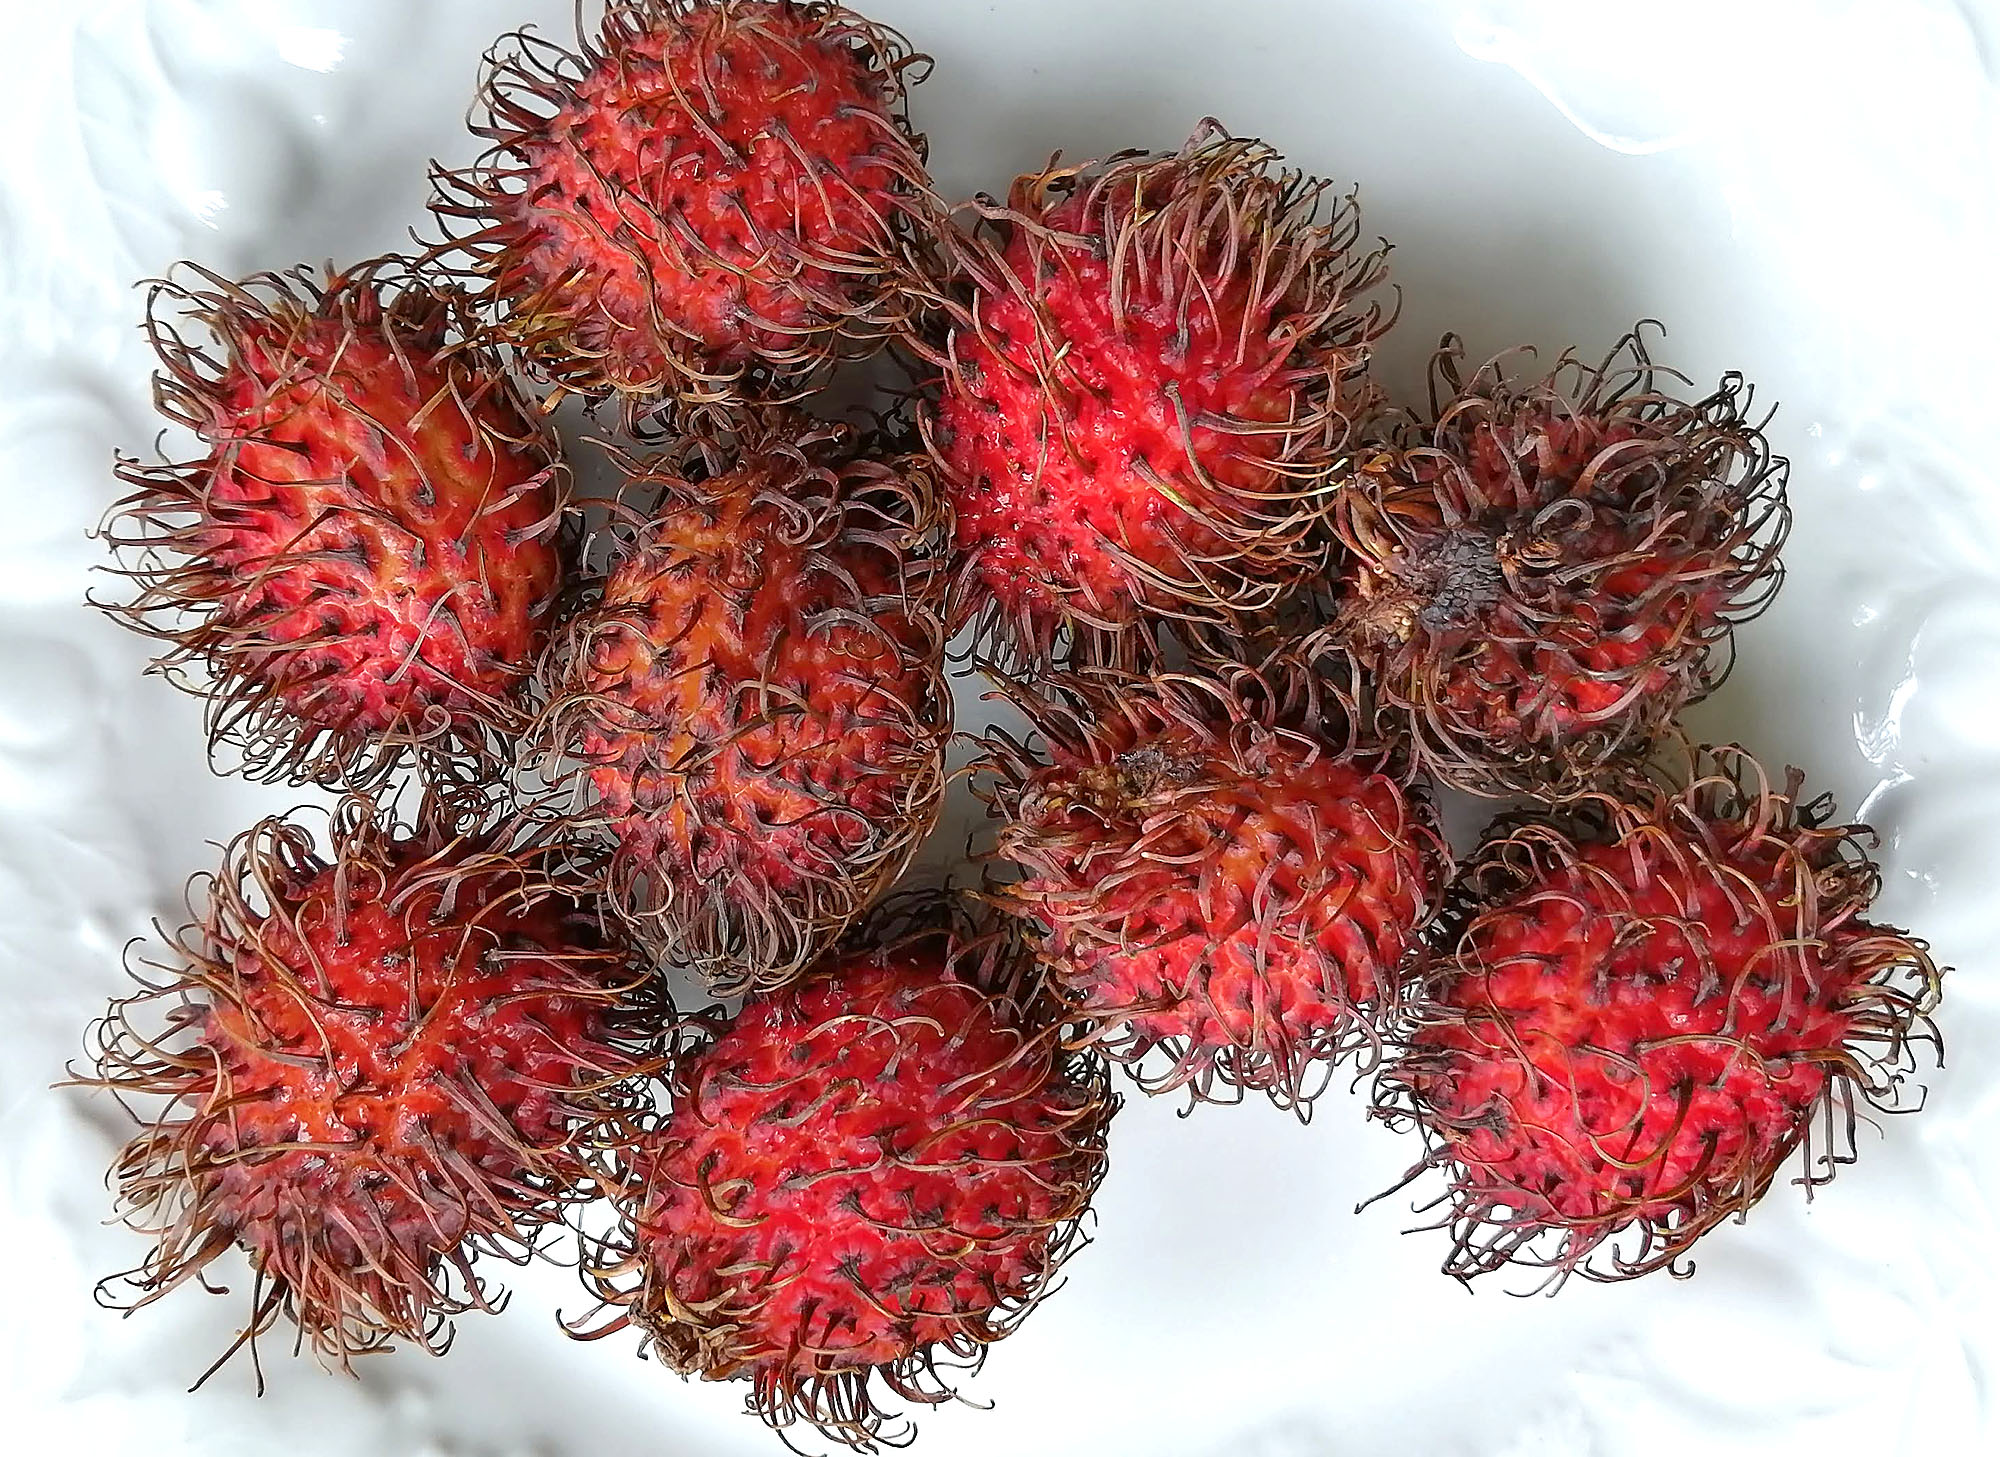 A display of a reddish hairy fruit called â€œrambutanâ€ on a white plate. Photo by Paul Young.